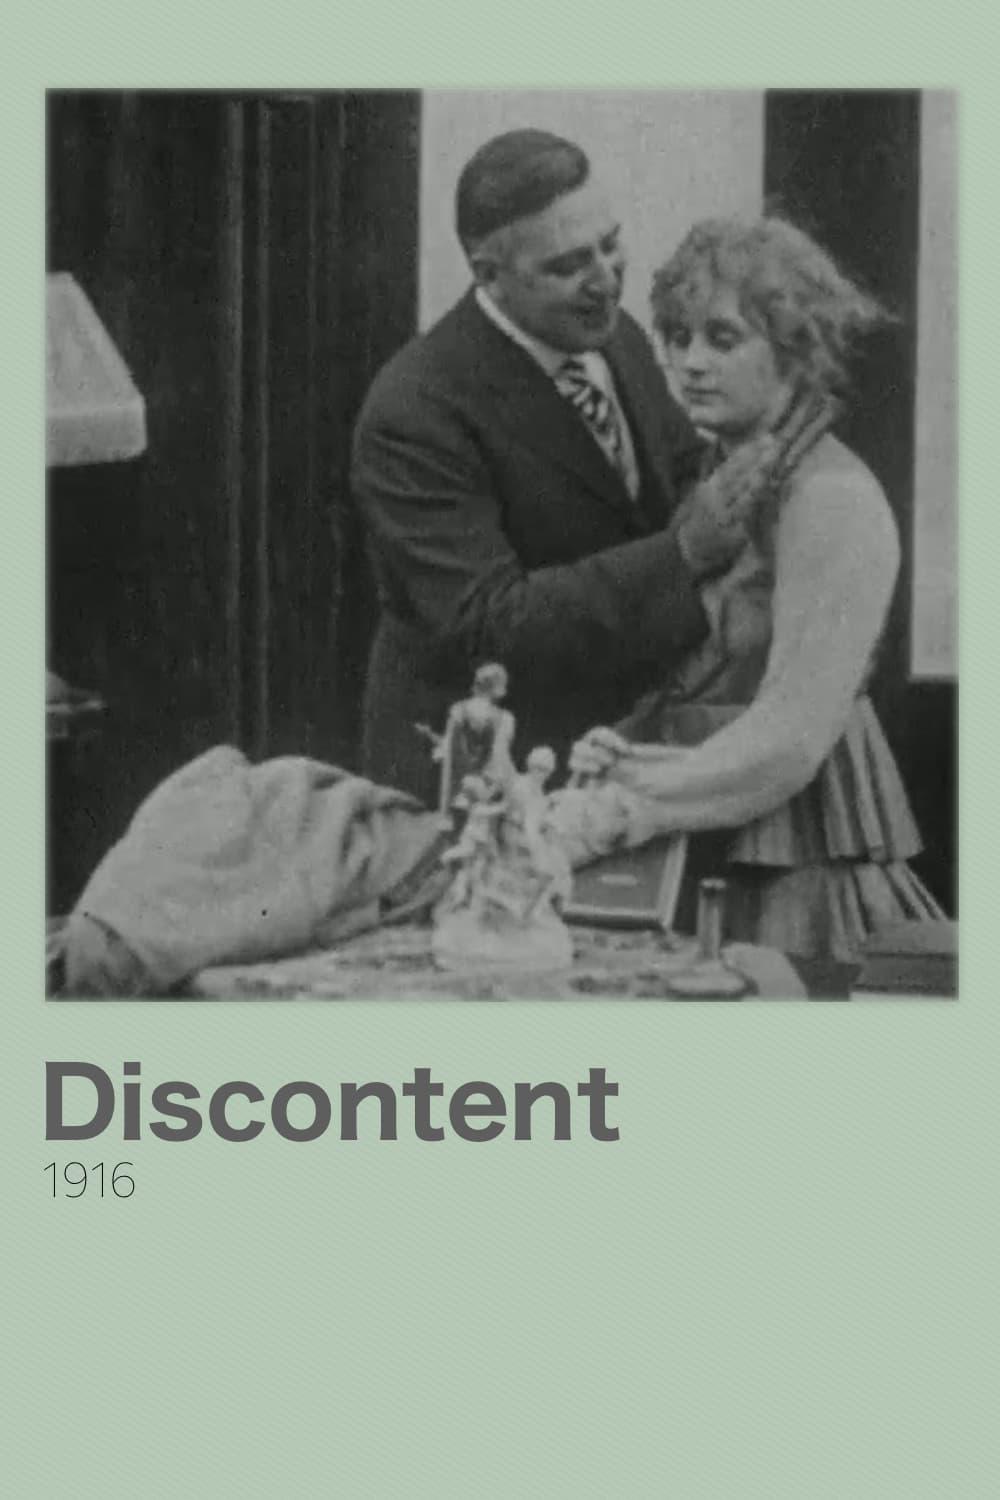 Discontent poster